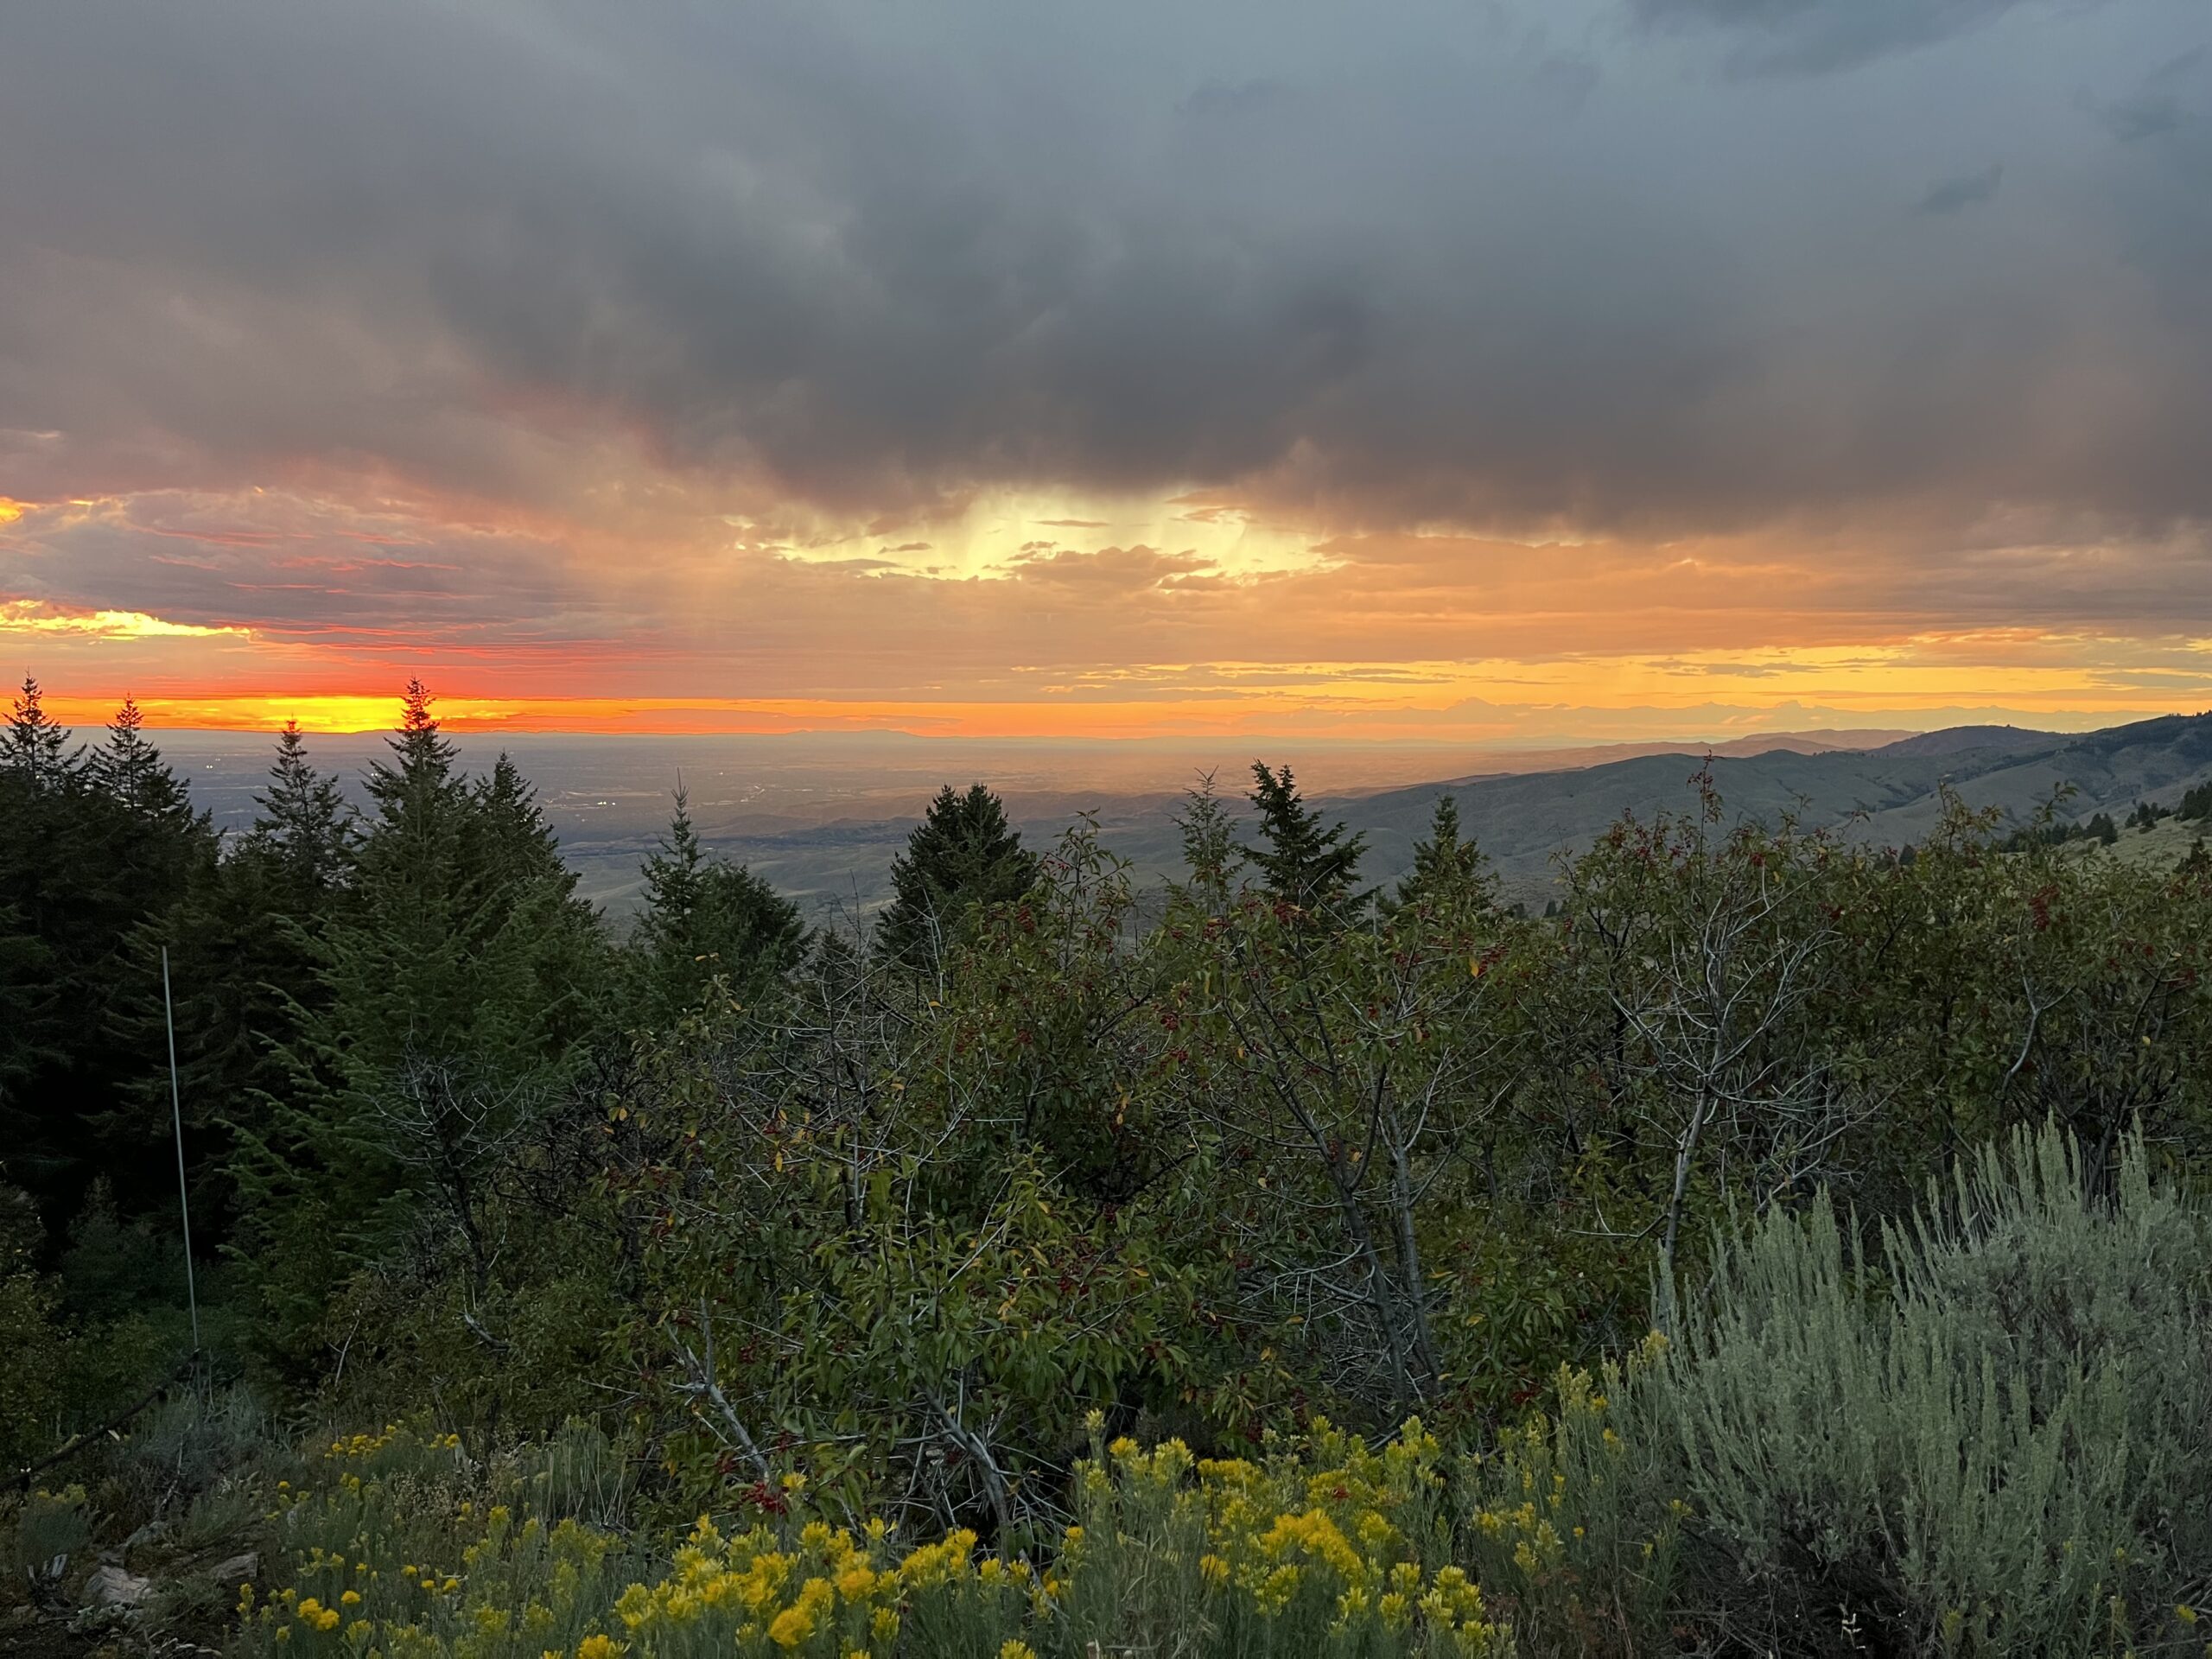 A beautiful sunset illuminates the blue, yellow and orange of the sky over Boise looking from Lucky Peak. There are douglas fir trees, rabbitbrush with yellow flowers, and gray-green sagebrush in the foreground.